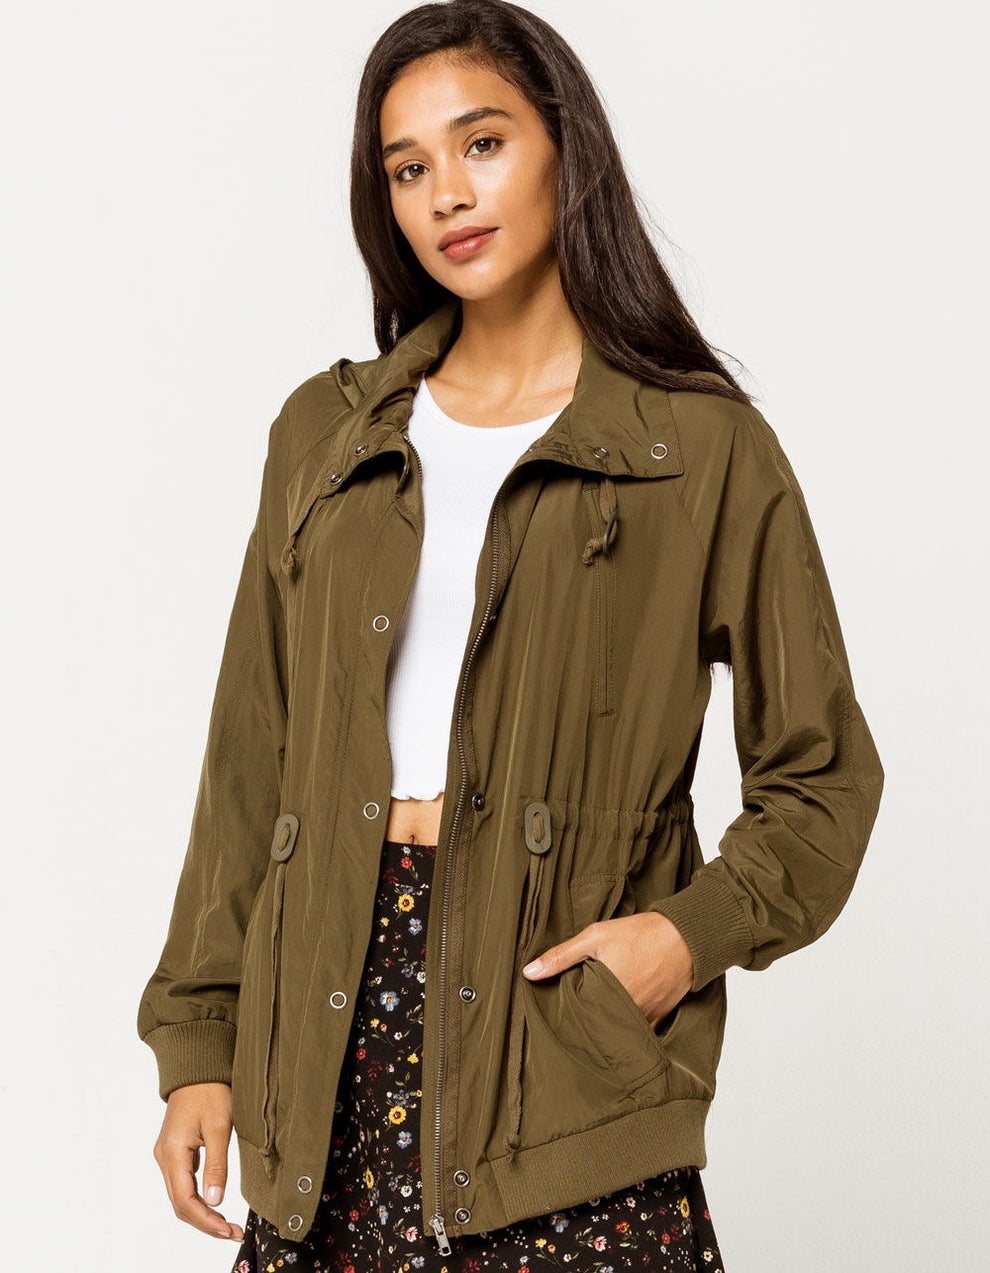 23 Pieces Of Outerwear You'll Probably Want In Your Fall Wardrobe